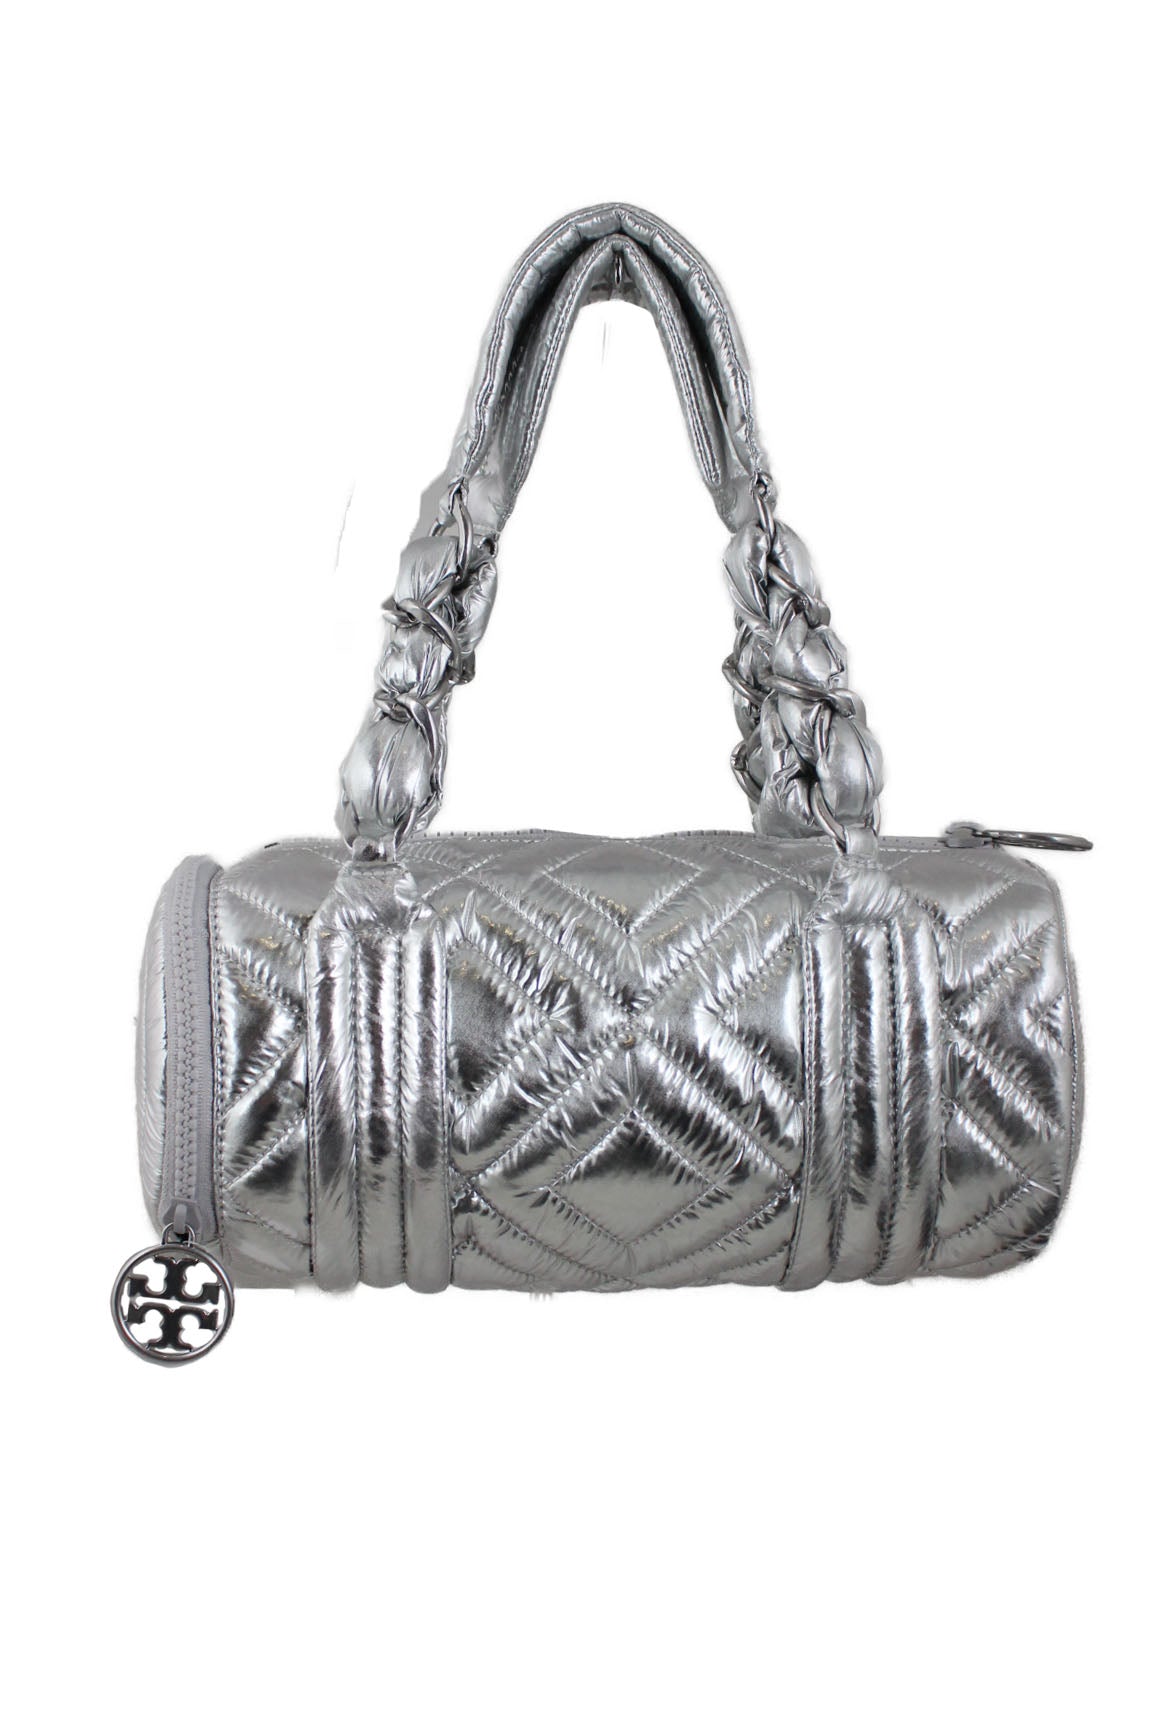 description: tory burch silver quilted mini duffle nylon bag. features double quilted chain strap, top zipper closure, zipper closure at side, quilted geometric pattern throughout, and tory burch logo embossed at sides. 